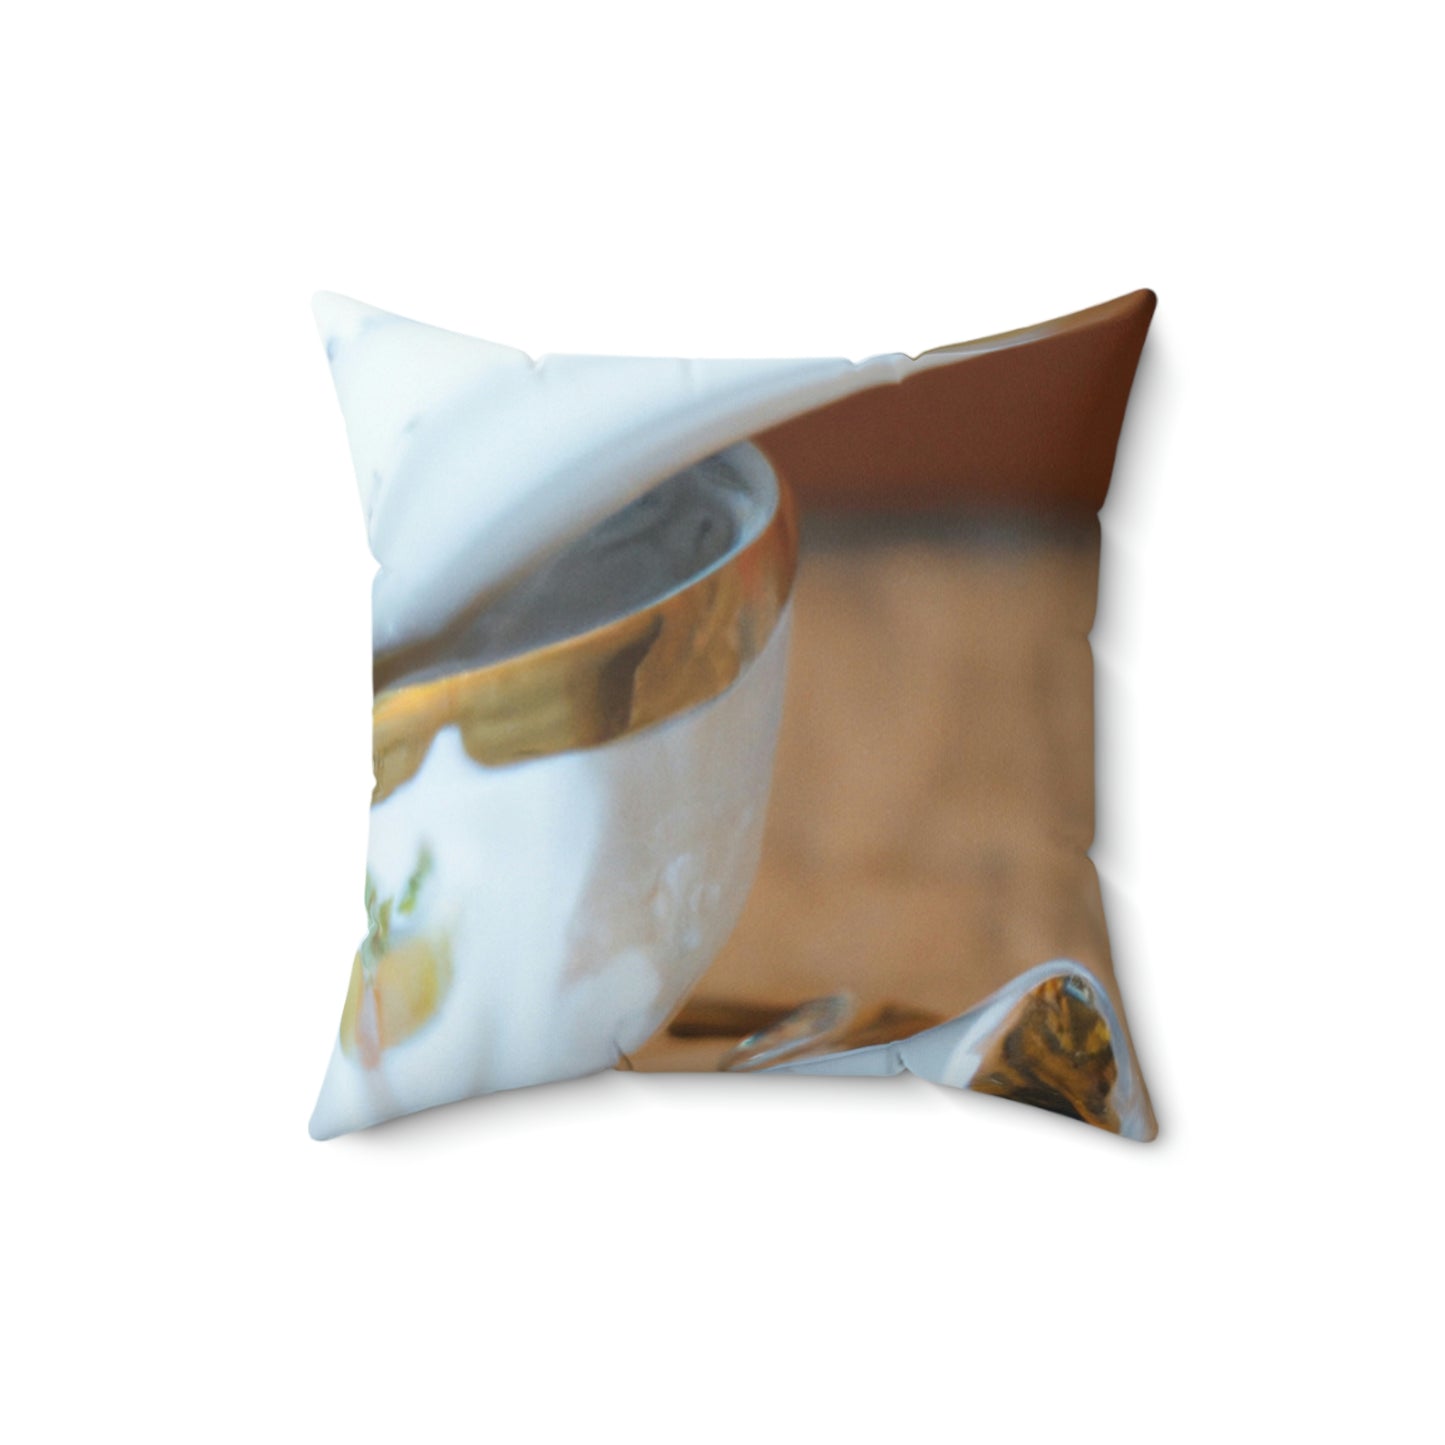 "A Cup of Comfort" - The Alien Square Pillow